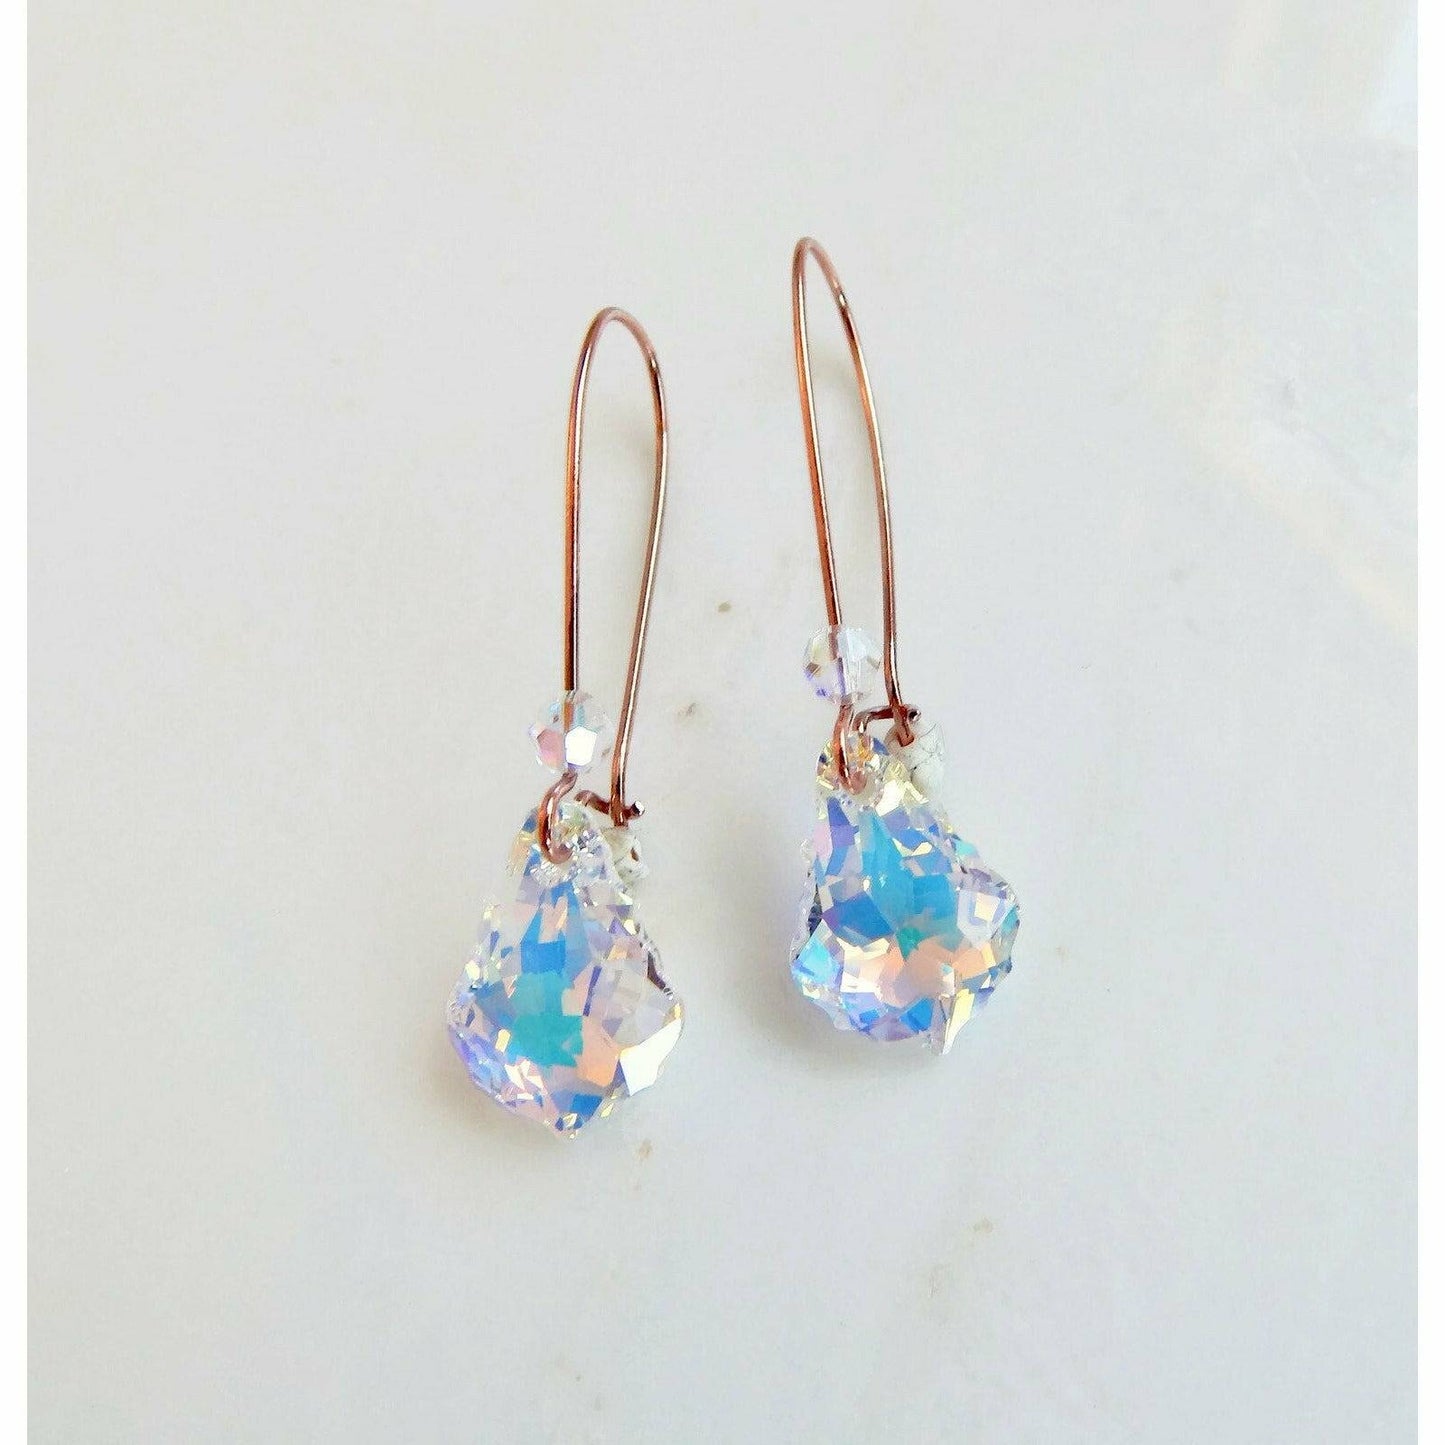 Iridescent crystal earrings on rose gold